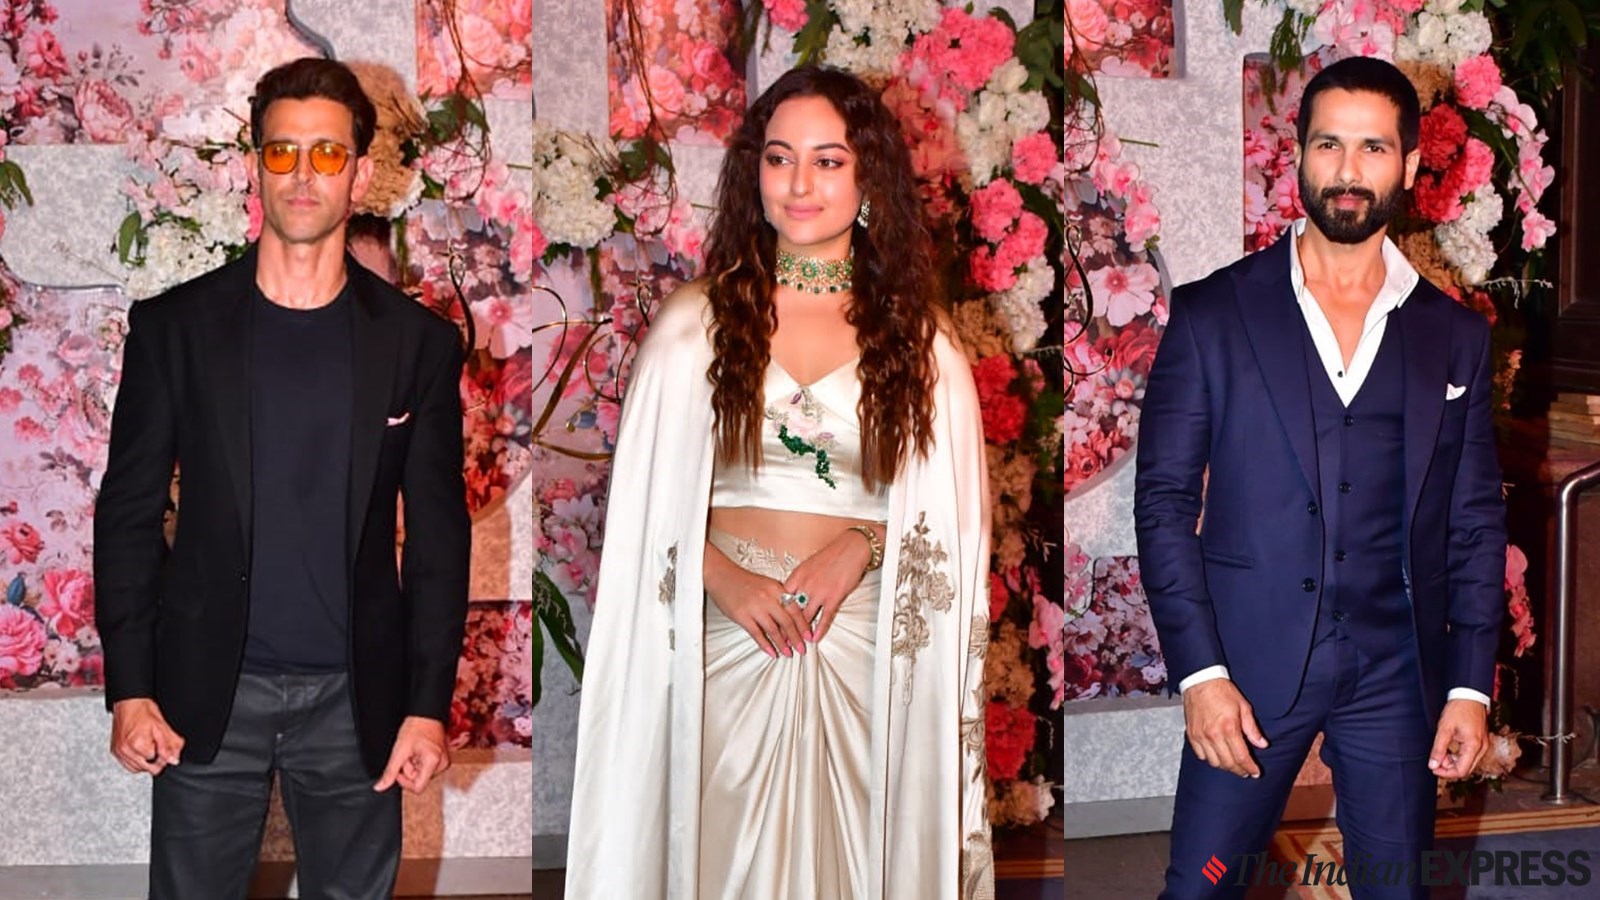 Sonakshi Sinha Blue Film Sex Videos - Bollywood stars Hrithik Roshan, Sonakshi Sinha, Shahid Kapoor and others,  attend reception party in glam avatars | Fashion News - The Indian Express